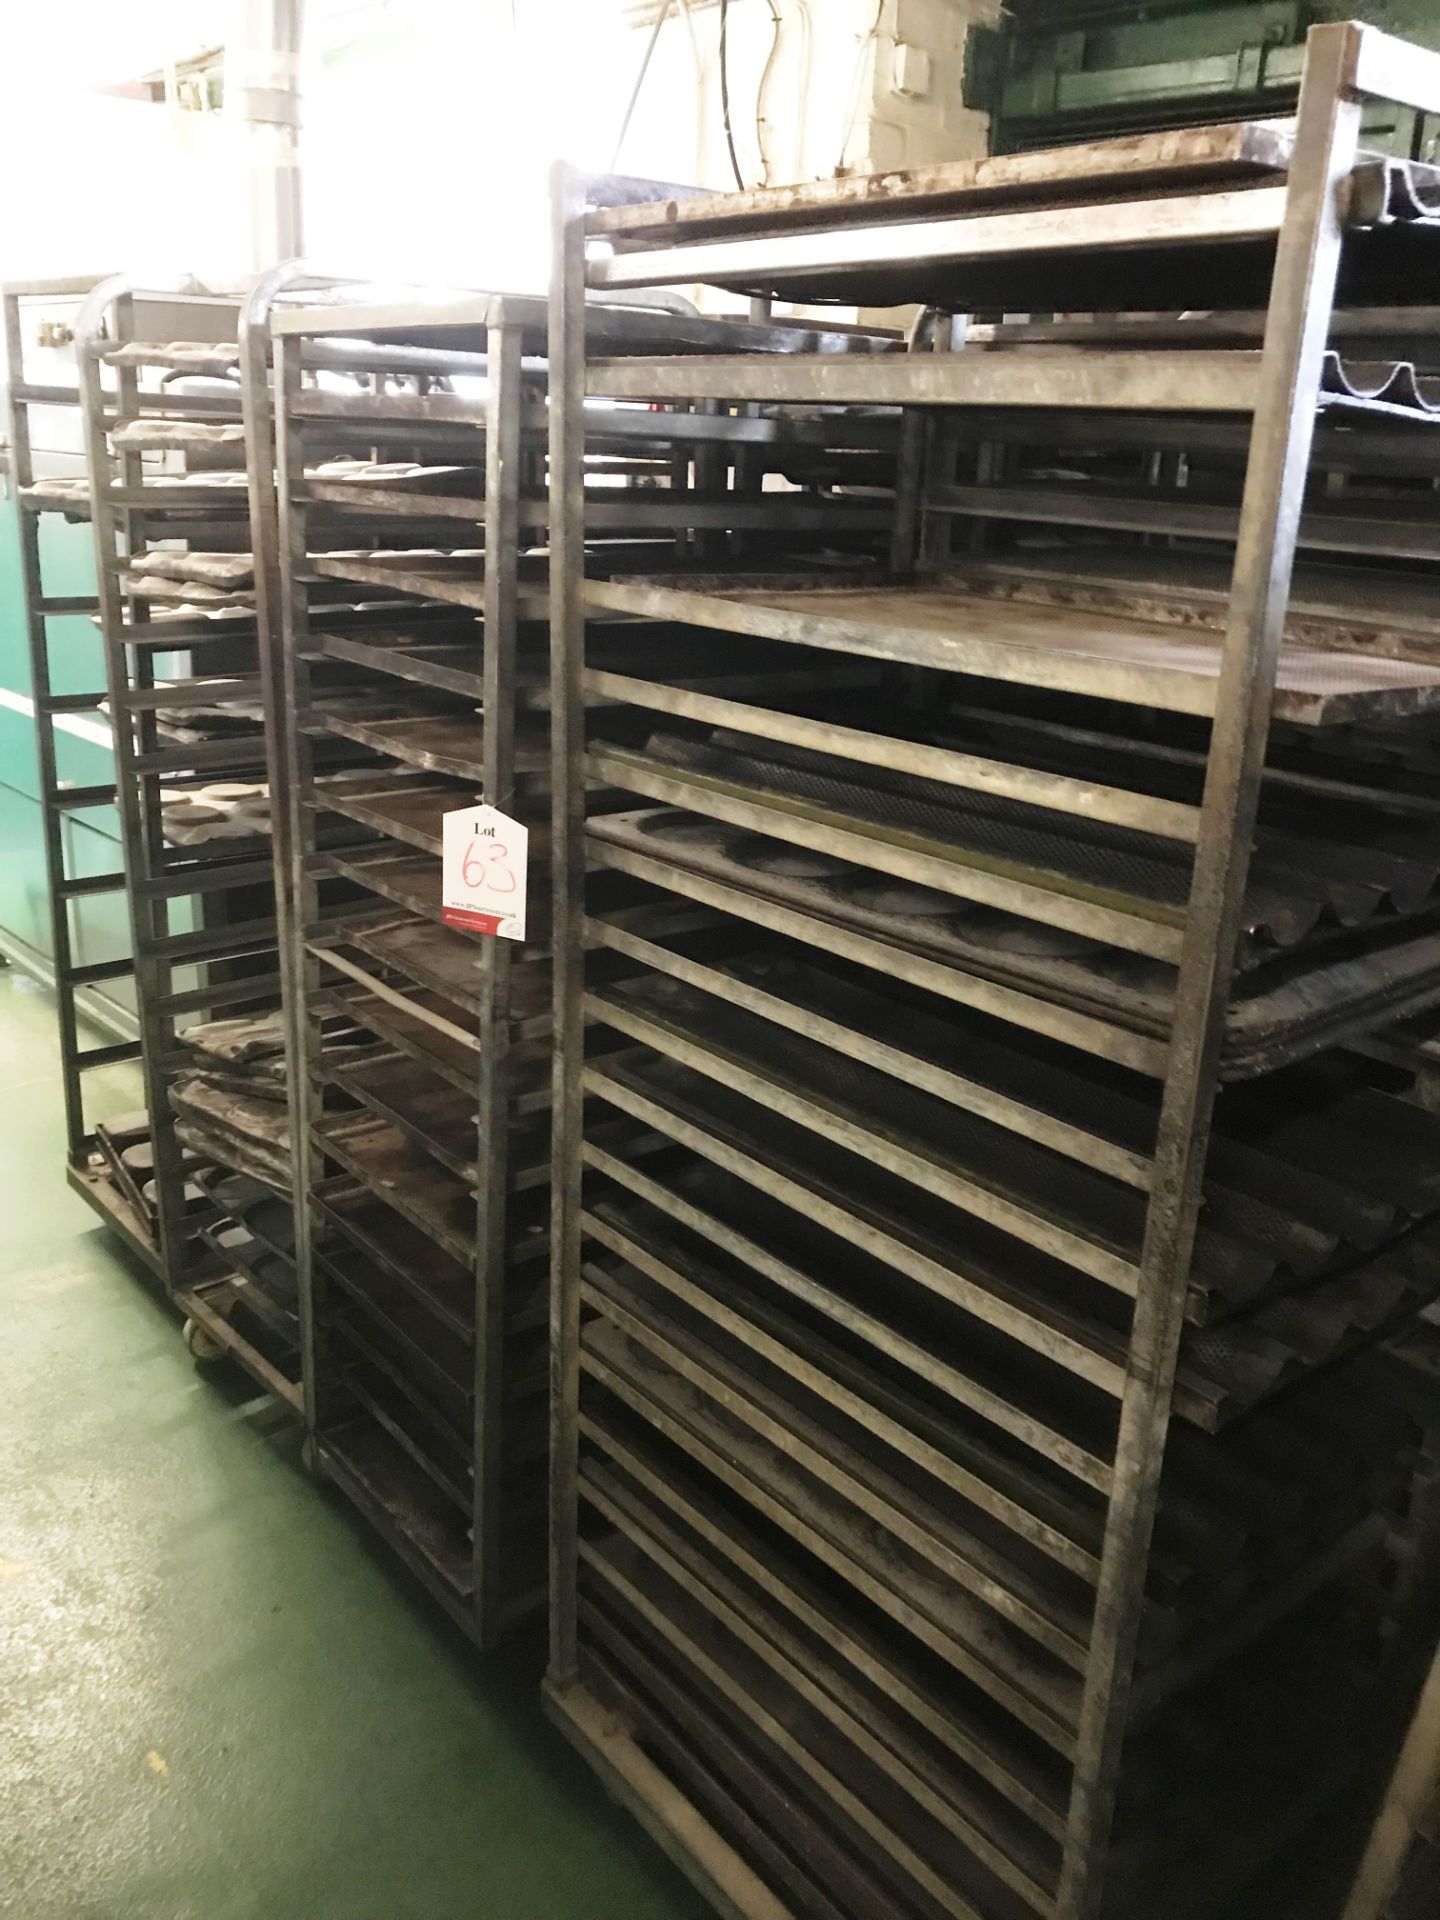 12 x Various Bakery Racks - As Pictured - Image 2 of 2